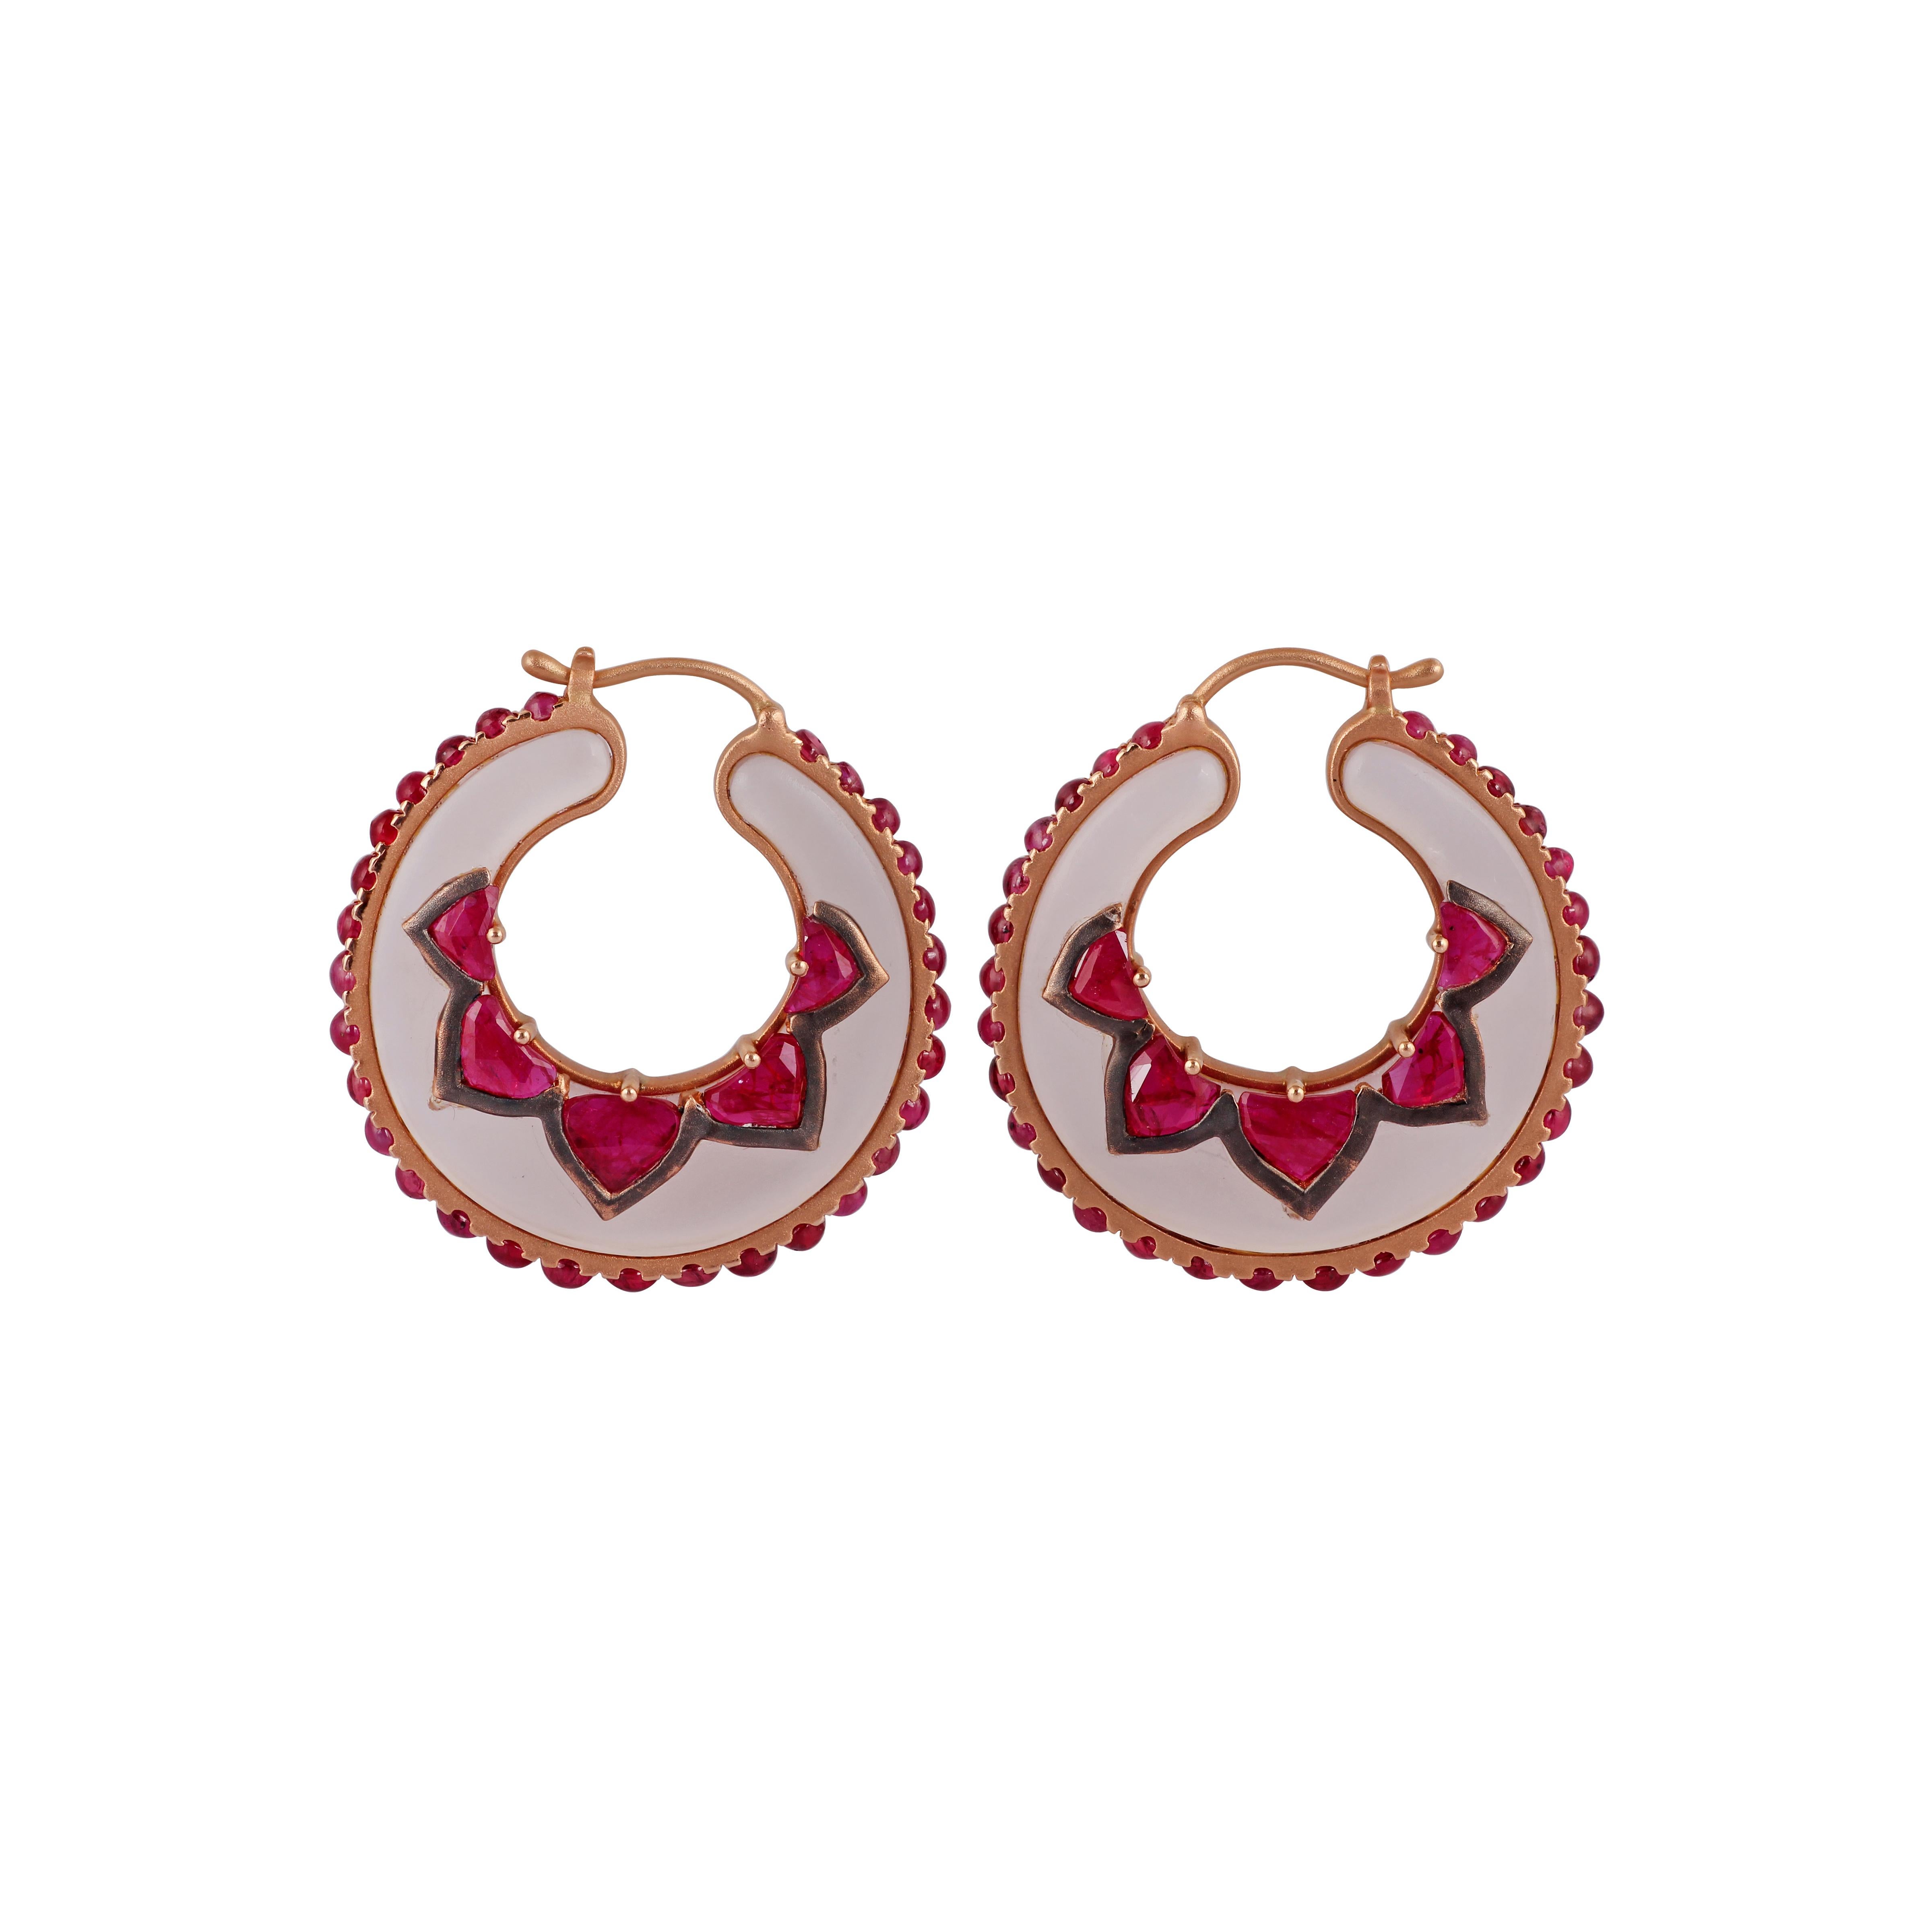 These are an exclusive & designer hoop style of earrings studded in 18k rose gold features rose quartz weight 32.10 carats & ruby weight 9.22 carats, these earrings are entirely made of 18k rose gold weight 8.76 grams, these earrings looks very